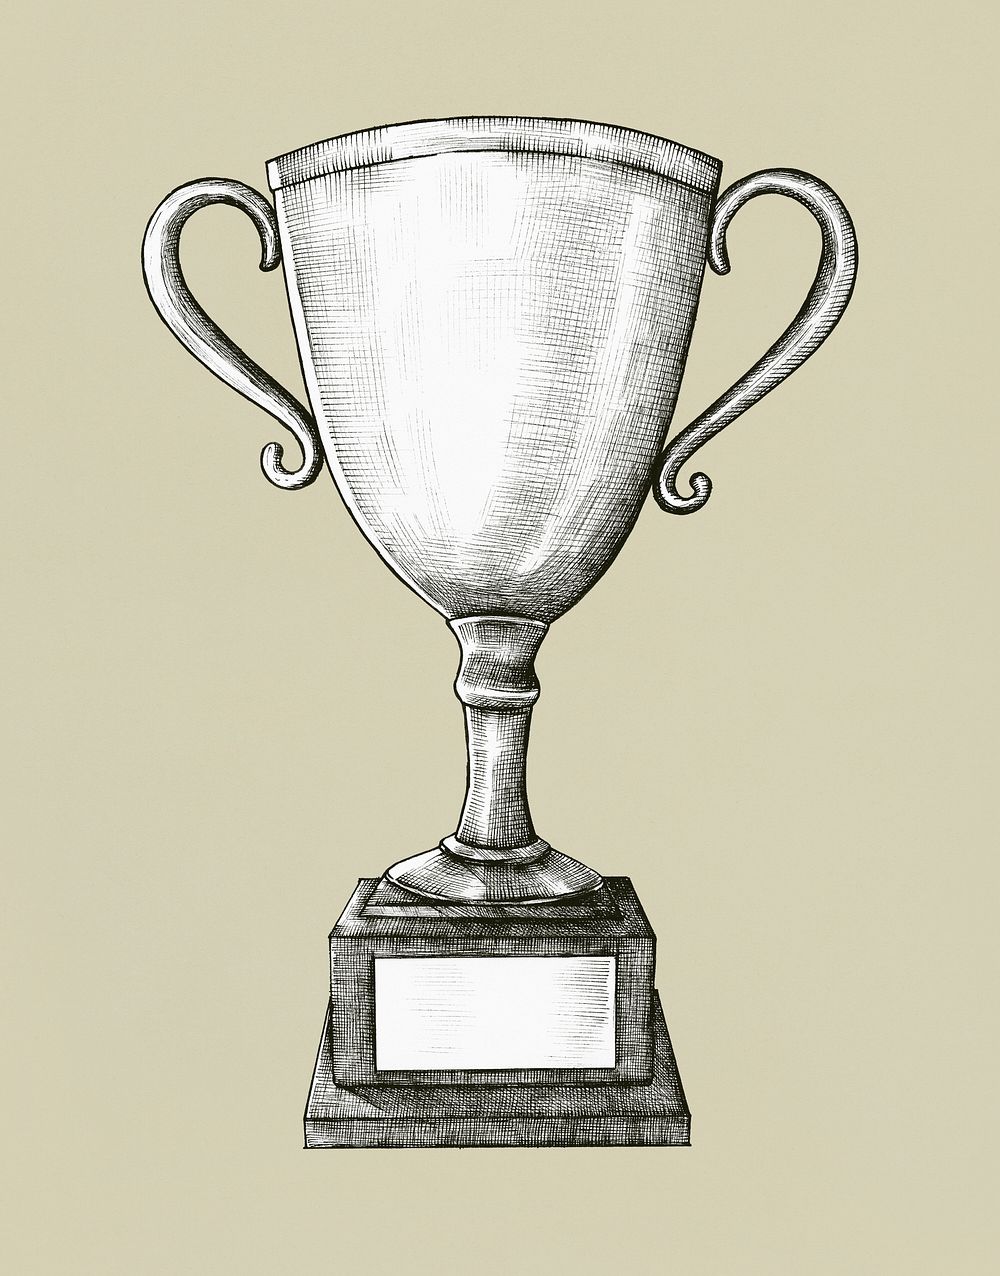 Trophy Drawing Images  Free Photos, PNG Stickers, Wallpapers